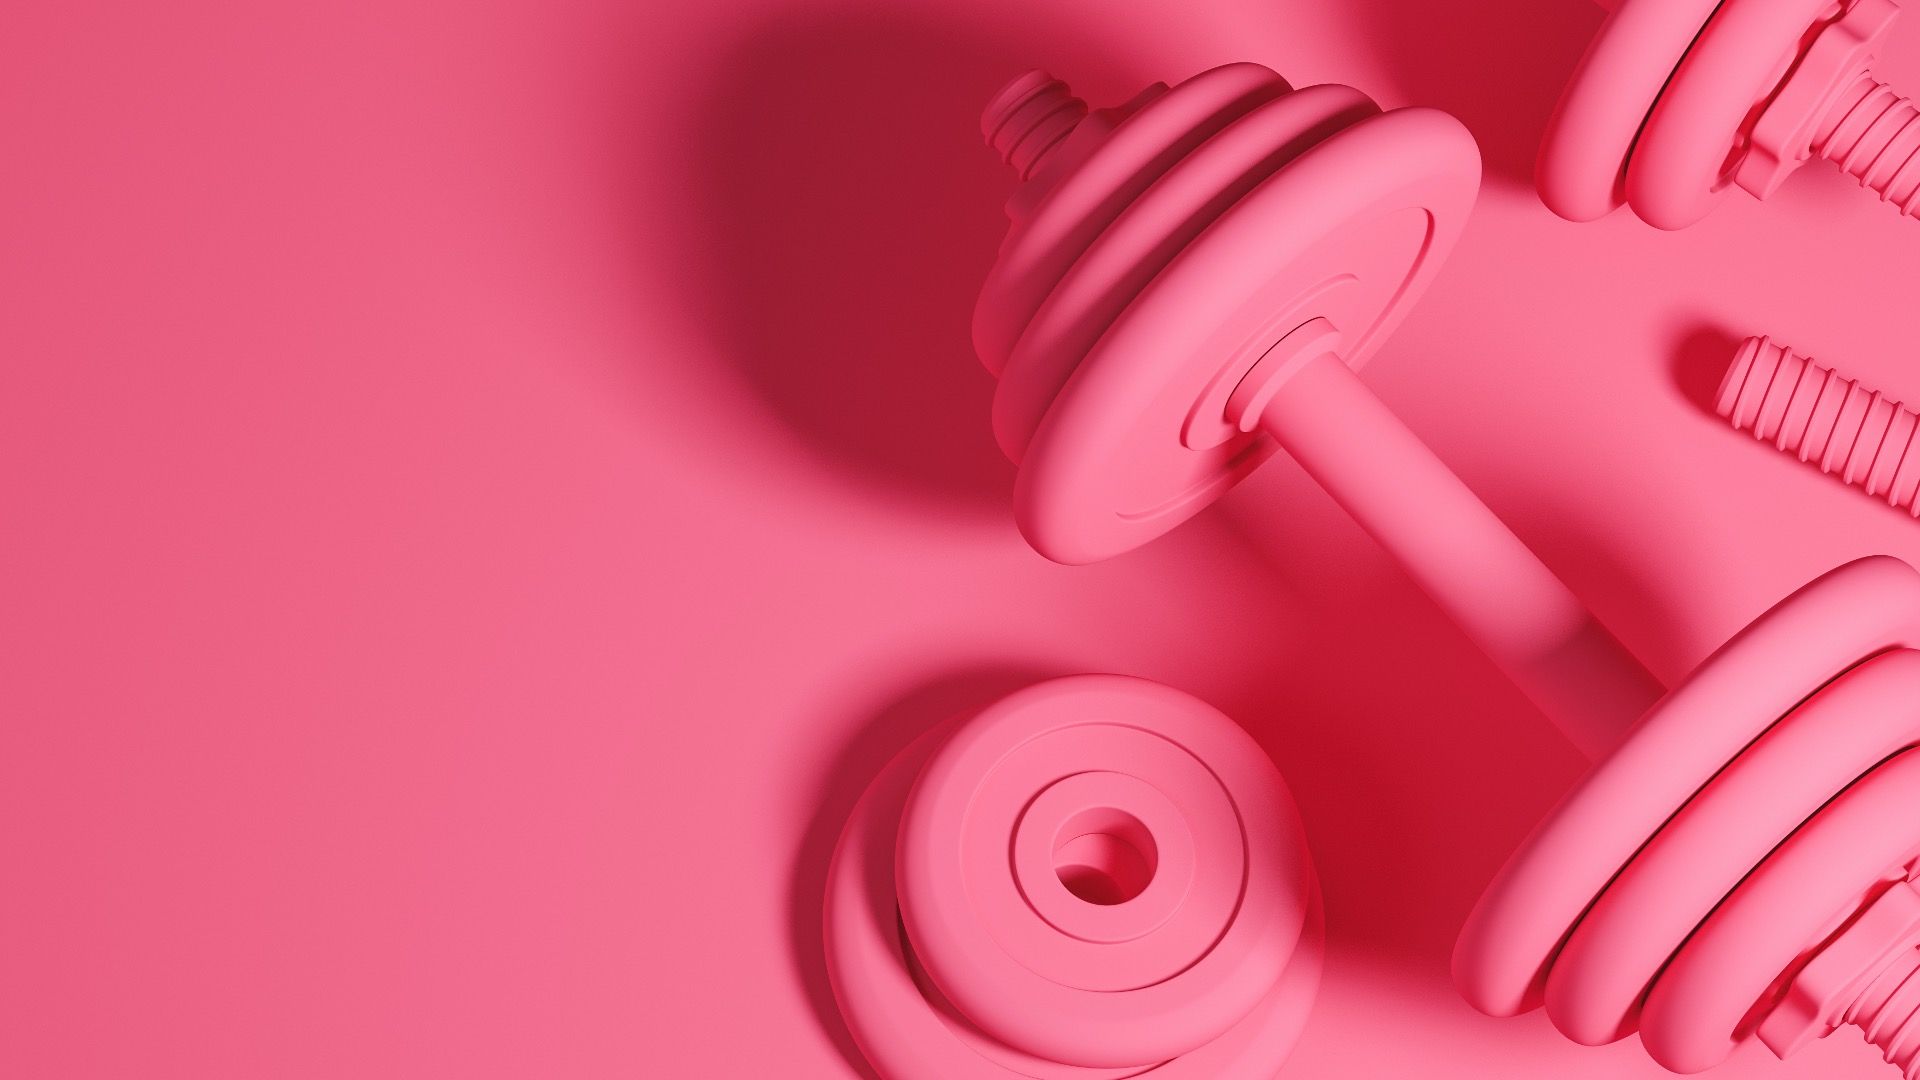 A pair of pink weights on a pink background - Pink